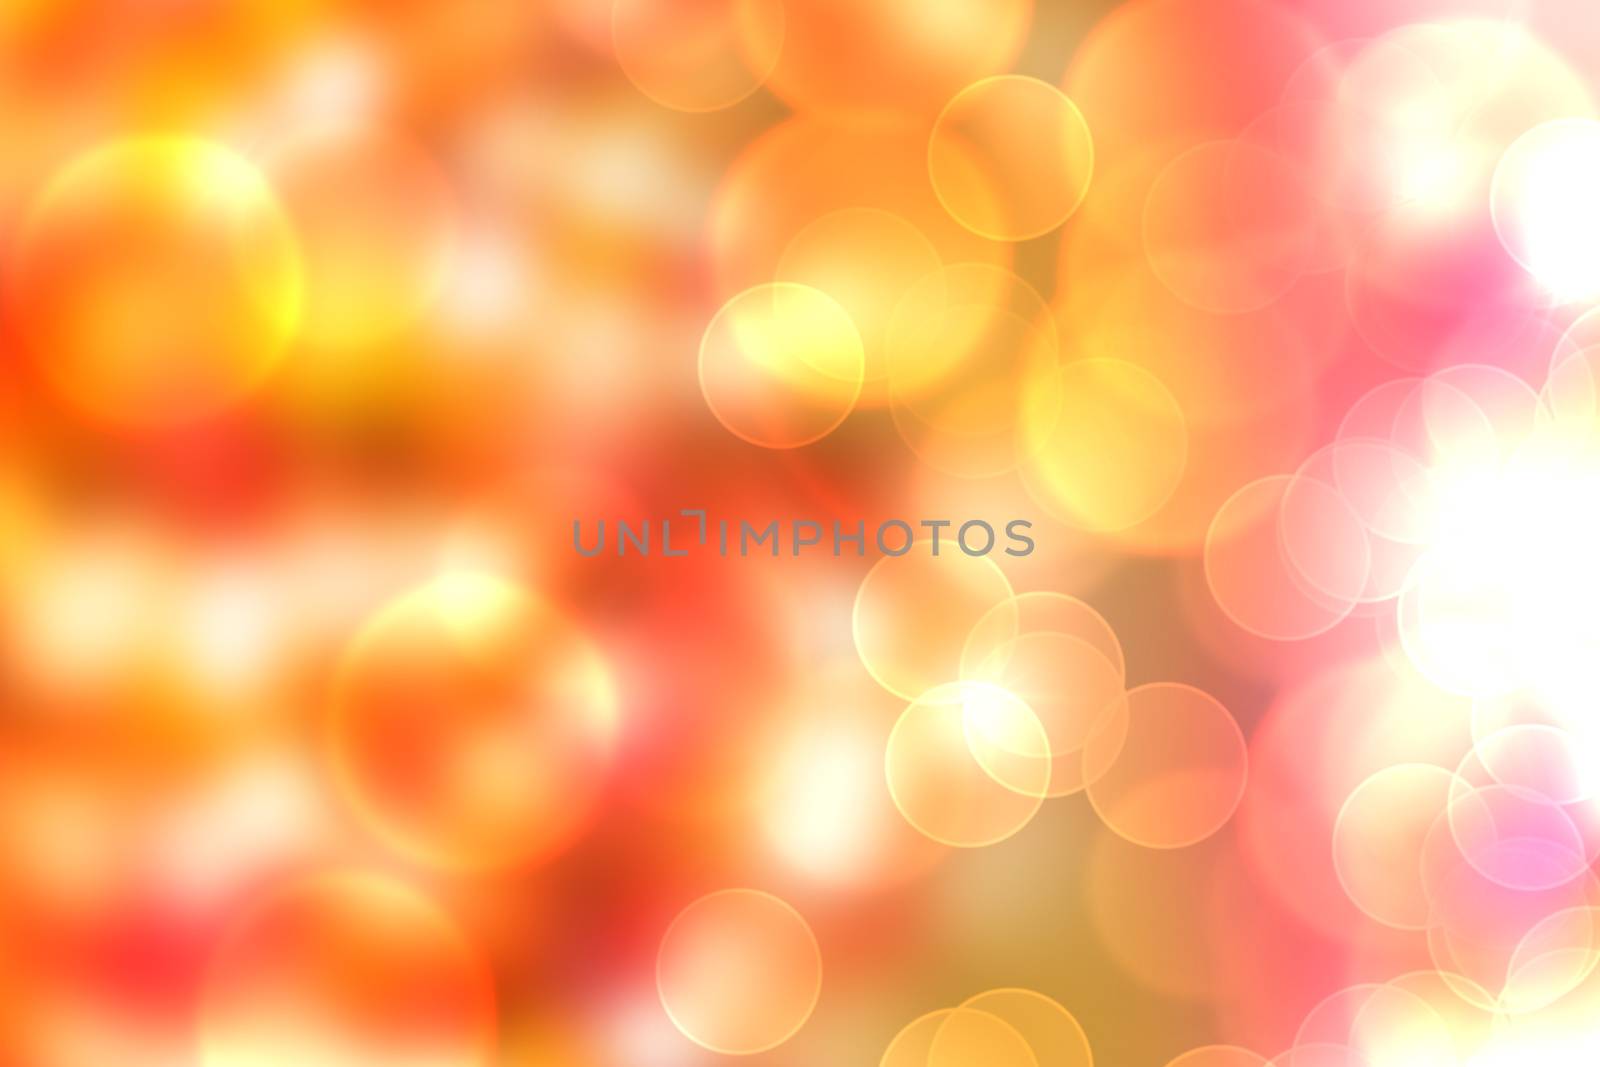 Transparent bokeh lights abstract background.